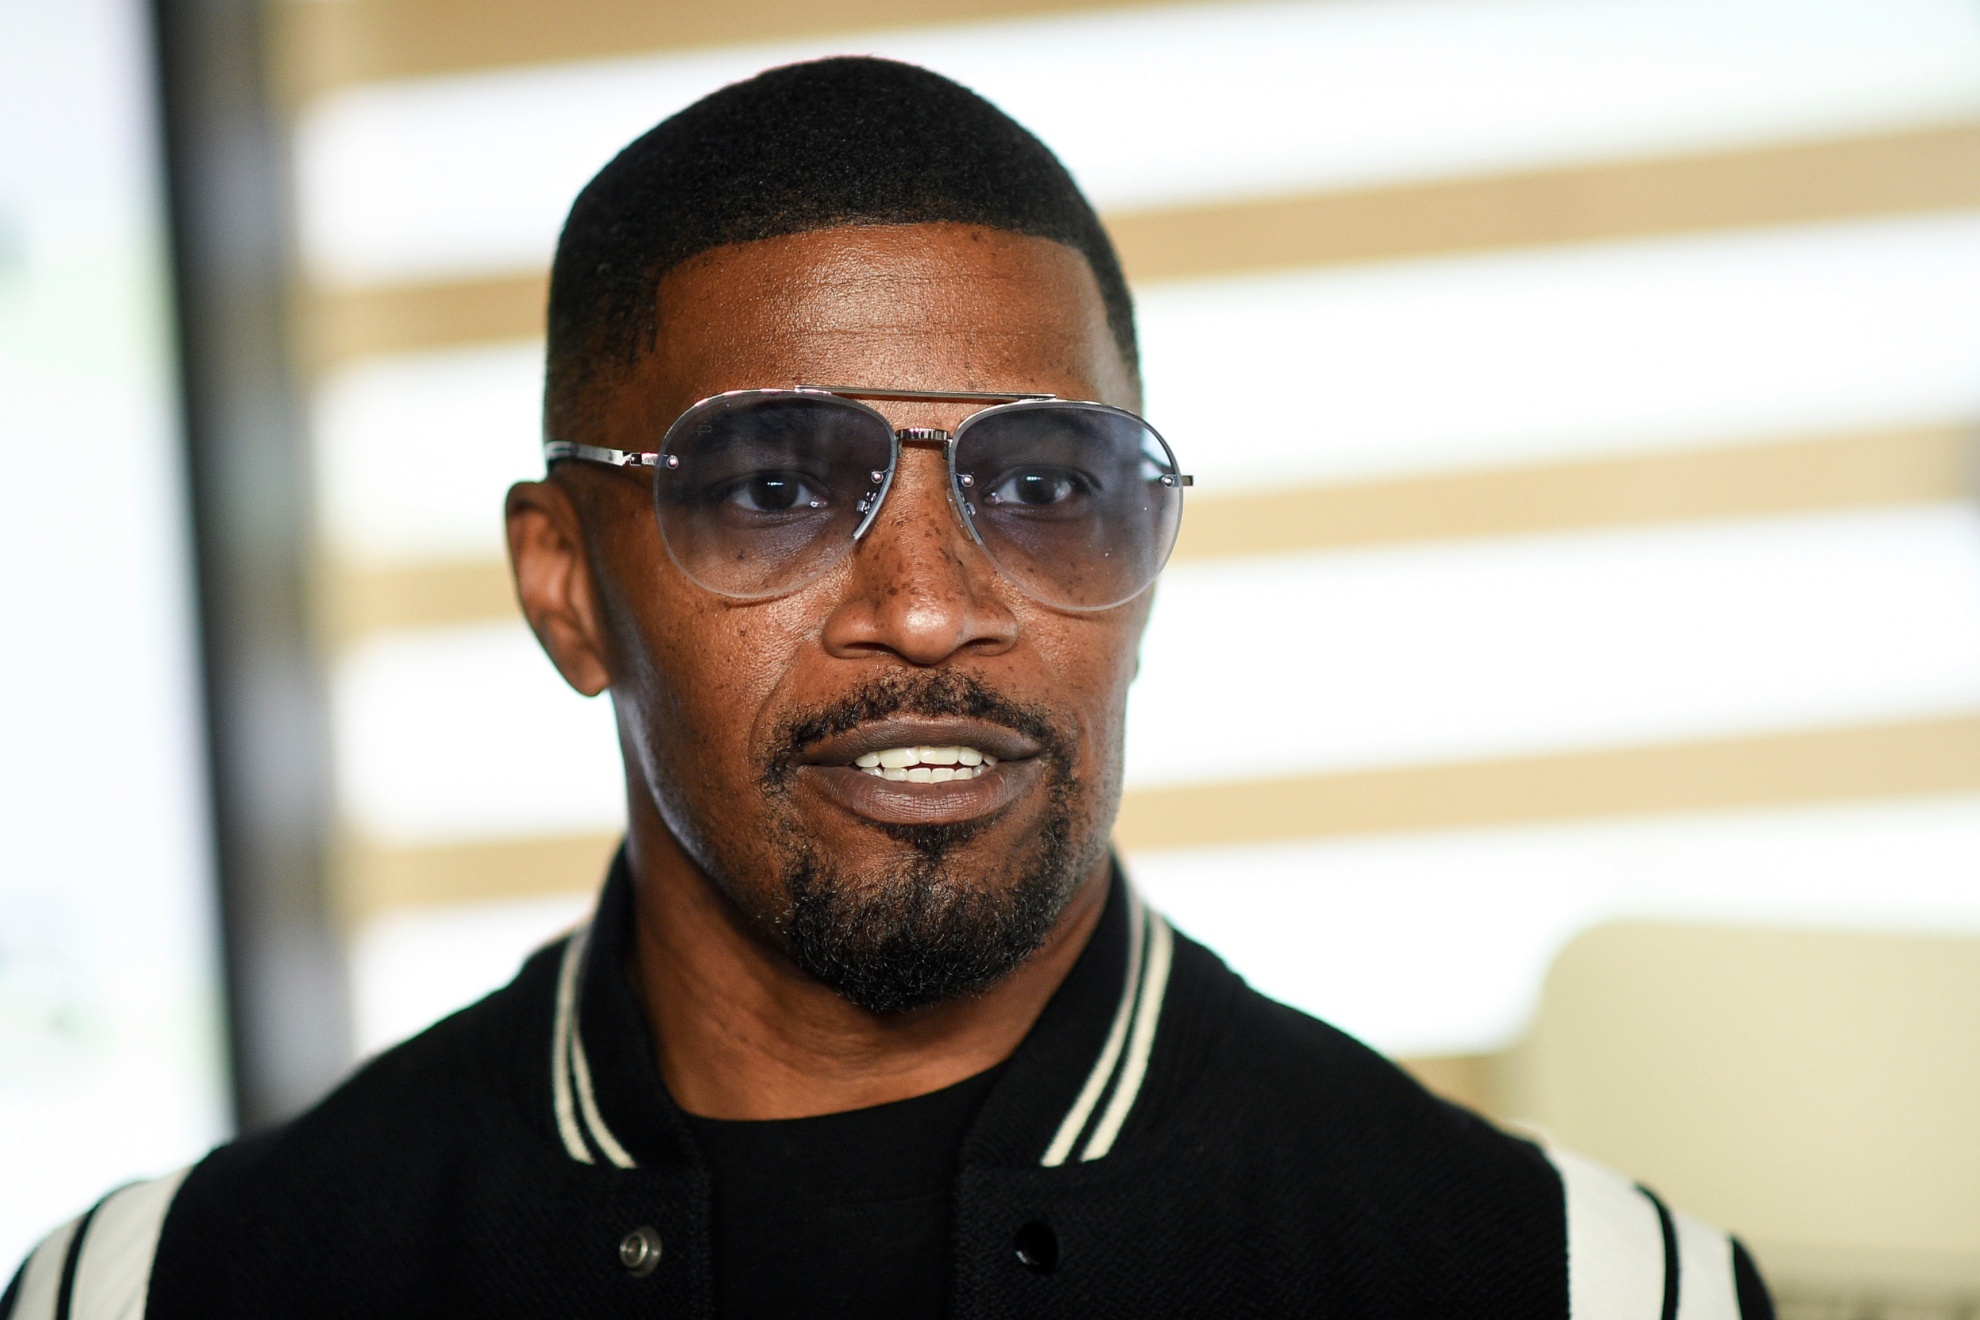 Actor Jamie Foxx is recovering from a yet undisclosed health issue.